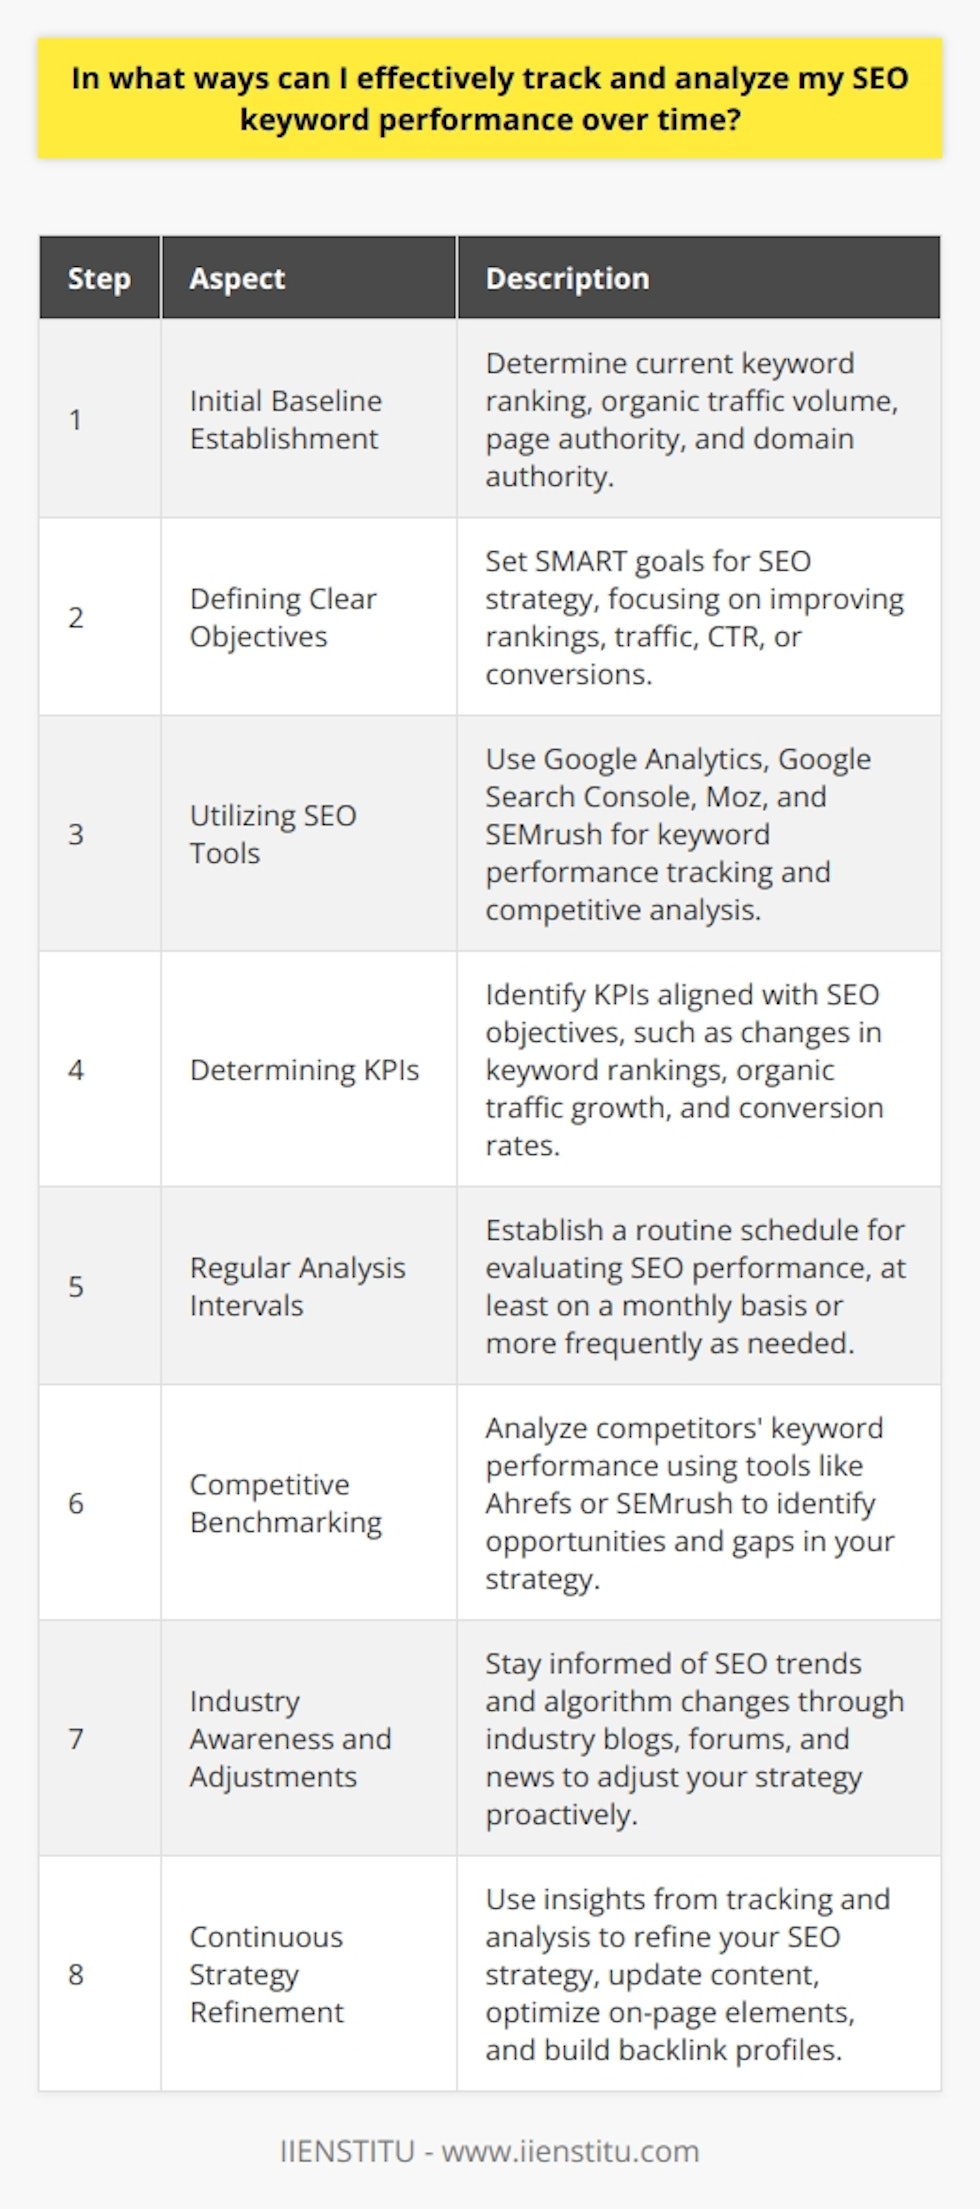 Tracking and analyzing SEO keyword performance is an ongoing process that requires a blend of strategic planning, systematic monitoring, and adaptability to ever-changing search engine landscapes. Here's a step-by-step approach to ensure you're effectively keeping tabs on your SEO keyword performance:1. Initial Baseline Establishment:   Begin by benchmarking your current SEO performance. Determine where your keywords currently rank, the volume of organic traffic they bring, and other metrics such as page authority and domain authority. This initial data will function as a point of reference for all future performance evaluations.2. Defining Clear Objectives:   Set specific, measurable, achievable, relevant, and time-bound (SMART) goals for your SEO strategy. Decide what you want to achieve with your keywords—are you looking to improve rankings, boost traffic, increase the click-through rate (CTR), or drive conversions? These goals will guide your SEO efforts and help focus your analytics.3. Utilizing SEO Tools:   Google Analytics, with integration of Google Search Console, is a powerful combination for tracking keyword performance. These tools allow you to track not only rankings but also page impressions, CTR, and user behavior on your site. SEO platforms such as Moz or SEMrush also offer rank tracking and competitive analysis, which are invaluable for collecting and analyzing SEO data.4. Determining KPIs:   Identify KPIs that align with your SEO objectives. Common KPIs to track over time might include changes in keyword rankings, growth in organic traffic, the quality of traffic (time on site, pages per session, bounce rate), backlink quantity and quality, and conversion rates deriving from organic search traffic.5. Regular Analysis Intervals:   Establishing a routine schedule for evaluating your SEO performance is crucial. Monthly assessments work well for most; however, depending on the volatility of your industry's online competition, you might opt for more frequent reviews. This periodic analysis helps in discerning the efficacy of your SEO efforts and in making data-driven decisions.6. Competitive Benchmarking:   By analyzing your competitors' keyword performance, you gain insights into their tactics and can identify potential keyword opportunities and gaps in your own strategy. Tools like Ahrefs or SEMrush can provide valuable data on competitors’ keyword rankings and SEO performance.7. Industry Awareness and Adjustments:   SEO is dynamic—search engine algorithms constantly change, user behavior shifts, and new trends emerge. Staying informed through industry blogs, forums, and news can give you an edge and allow you to adjust your strategy proactively.8. Continuous Strategy Refinement:   Use the insights gained from your tracking and analysis to continually refine your SEO strategy. Don’t be afraid to innovate and experiment with different tactics, whether it’s updating content, optimizing on-page elements, or building your backlink profile.By methodically tracking, analyzing, and tweaking your SEO performance against well-defined objectives and KPIs, you ensure that your keyword strategy doesn't just grow in ranking but also contributes towards your broader business objectives. Remember, this is a cyclical process—what you learn from today’s analysis informs tomorrow’s strategy.